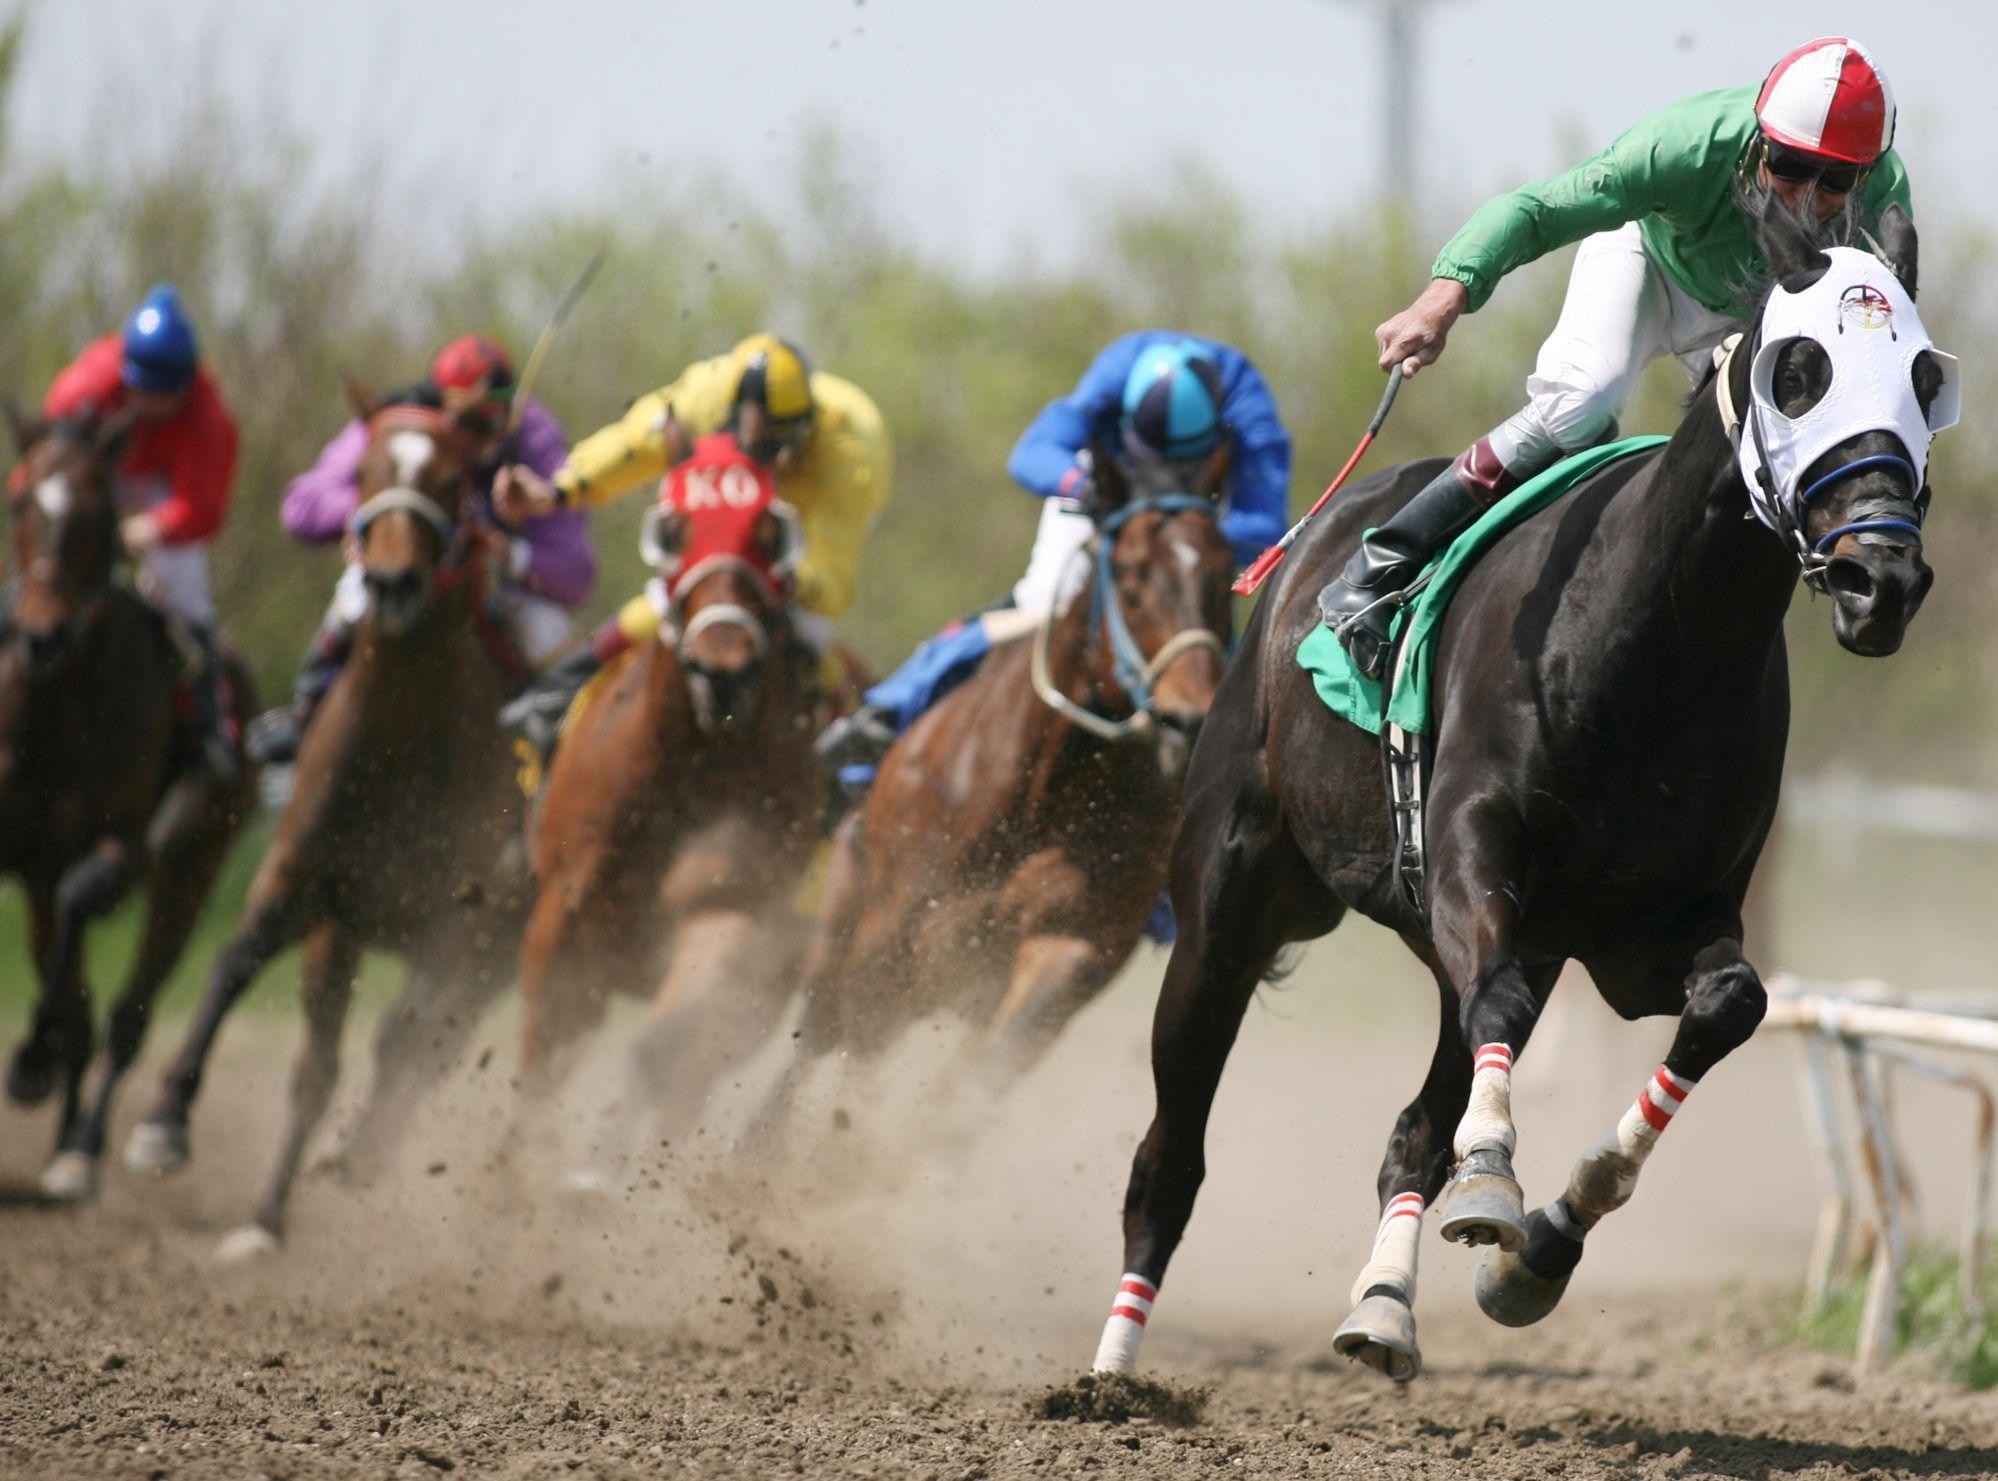 1998x1481 Horse race wallpapers and images - wallpapers, pictures, photos